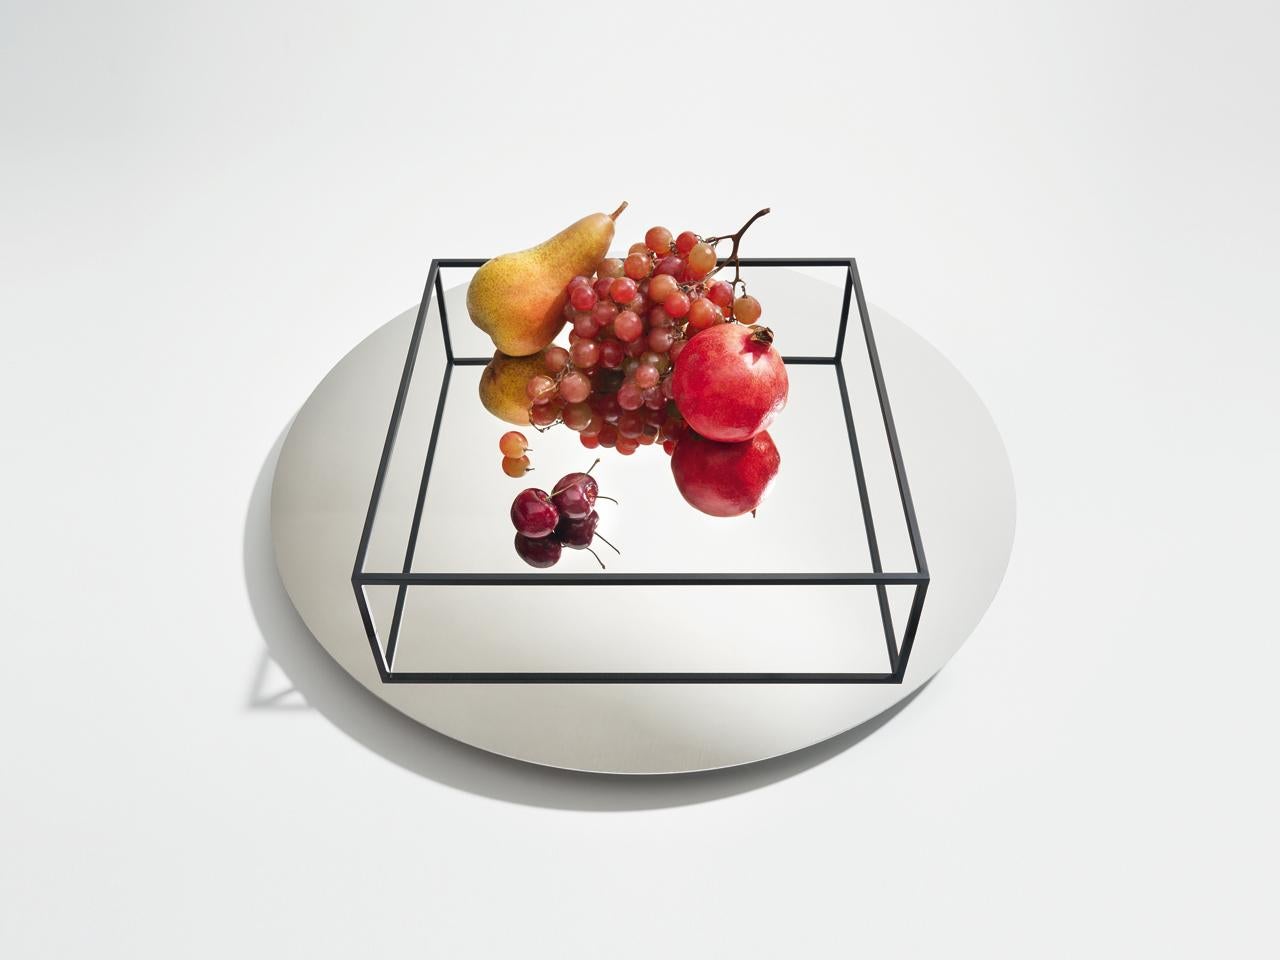 Surface e border no 1 is both a tray and a fruit bowl. The perimeter of the piece is made of thin lines of metal resting on a circular mirror. The combination of these elements creates a play of reflections that, to the eye, seems to alter the